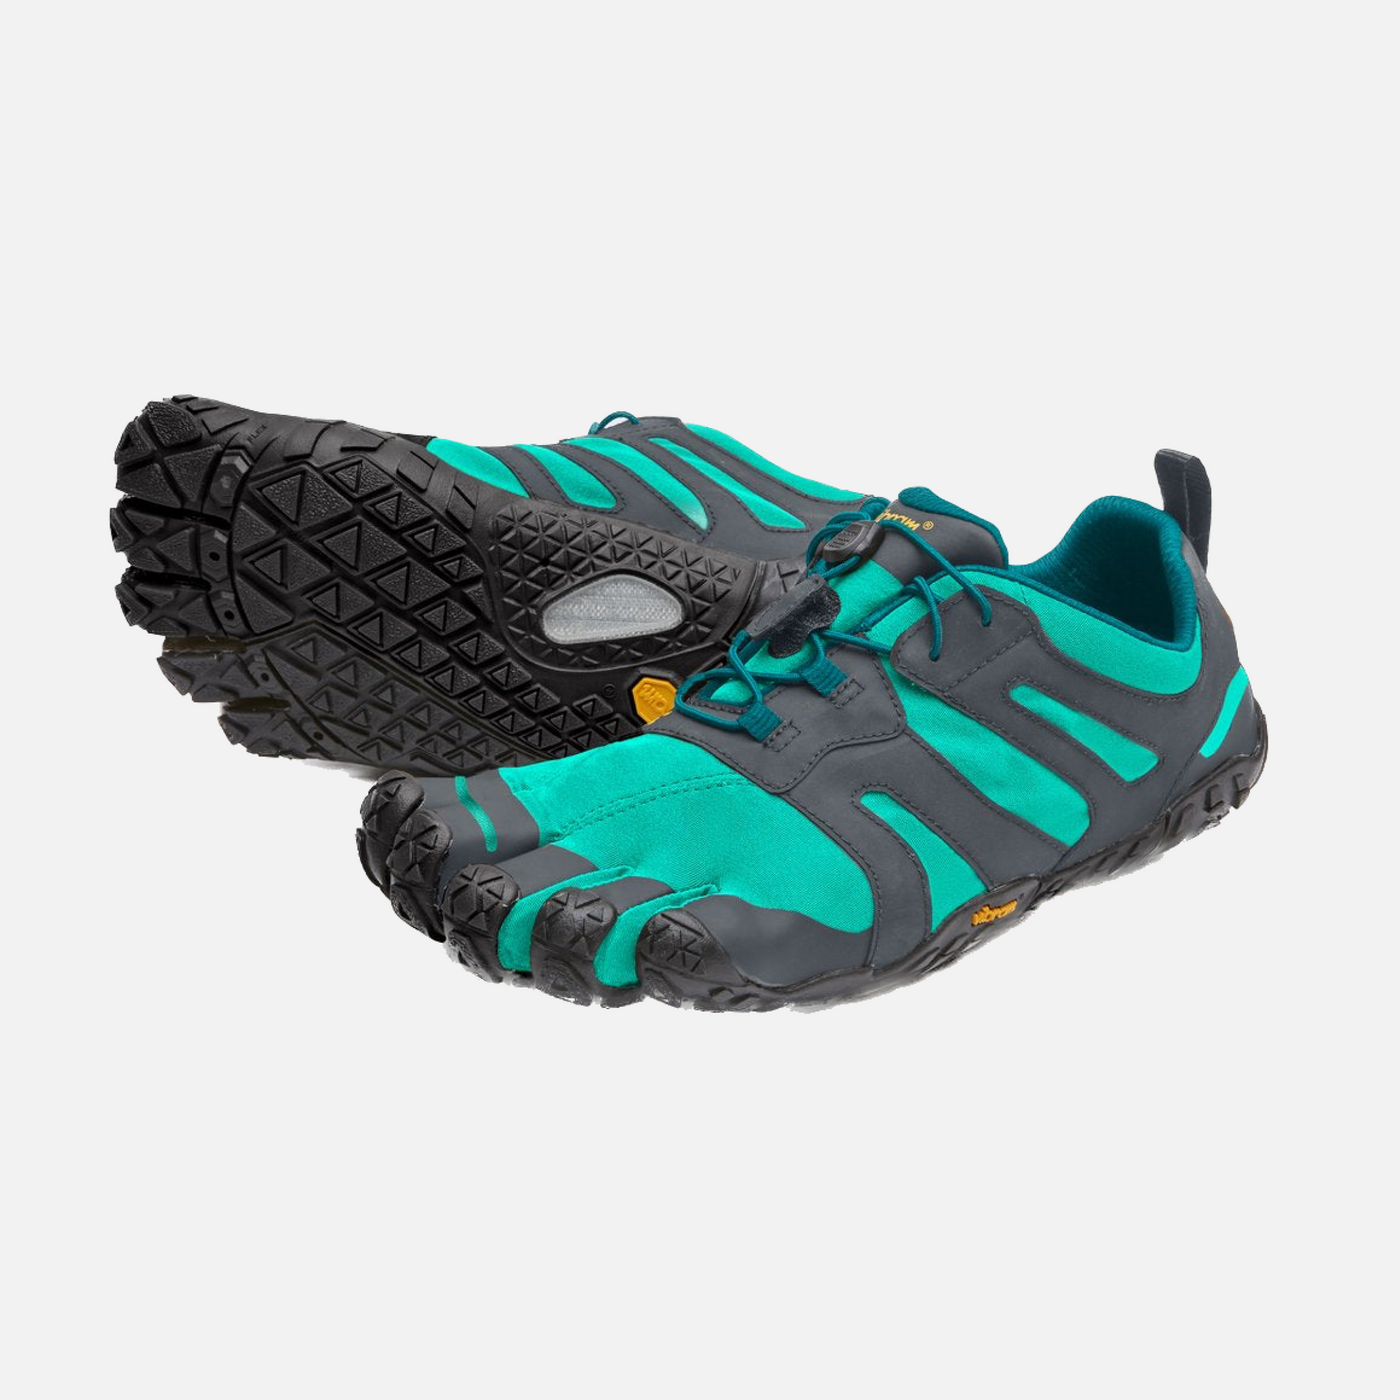 V-Trail 2.0 Women's outdoor shoes - Green/Grey